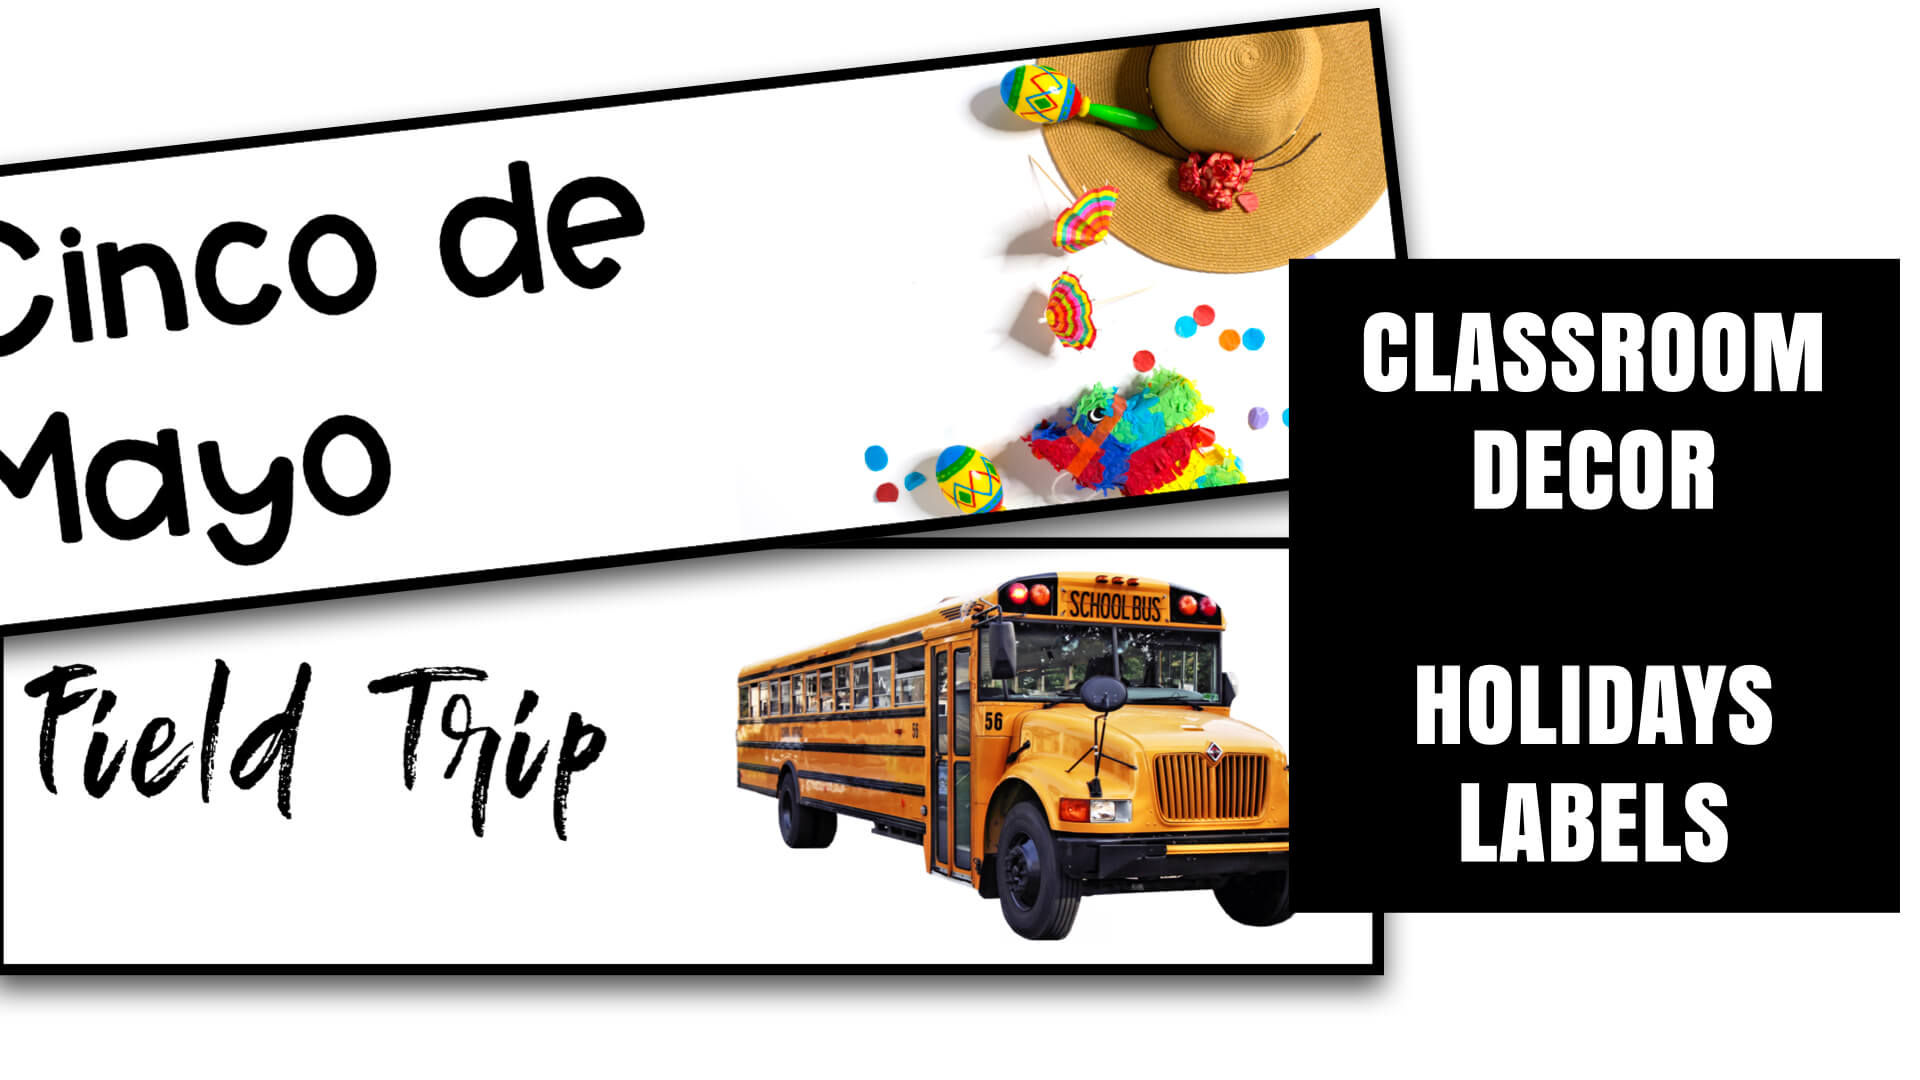 holidays-labels-for-classroom-editable